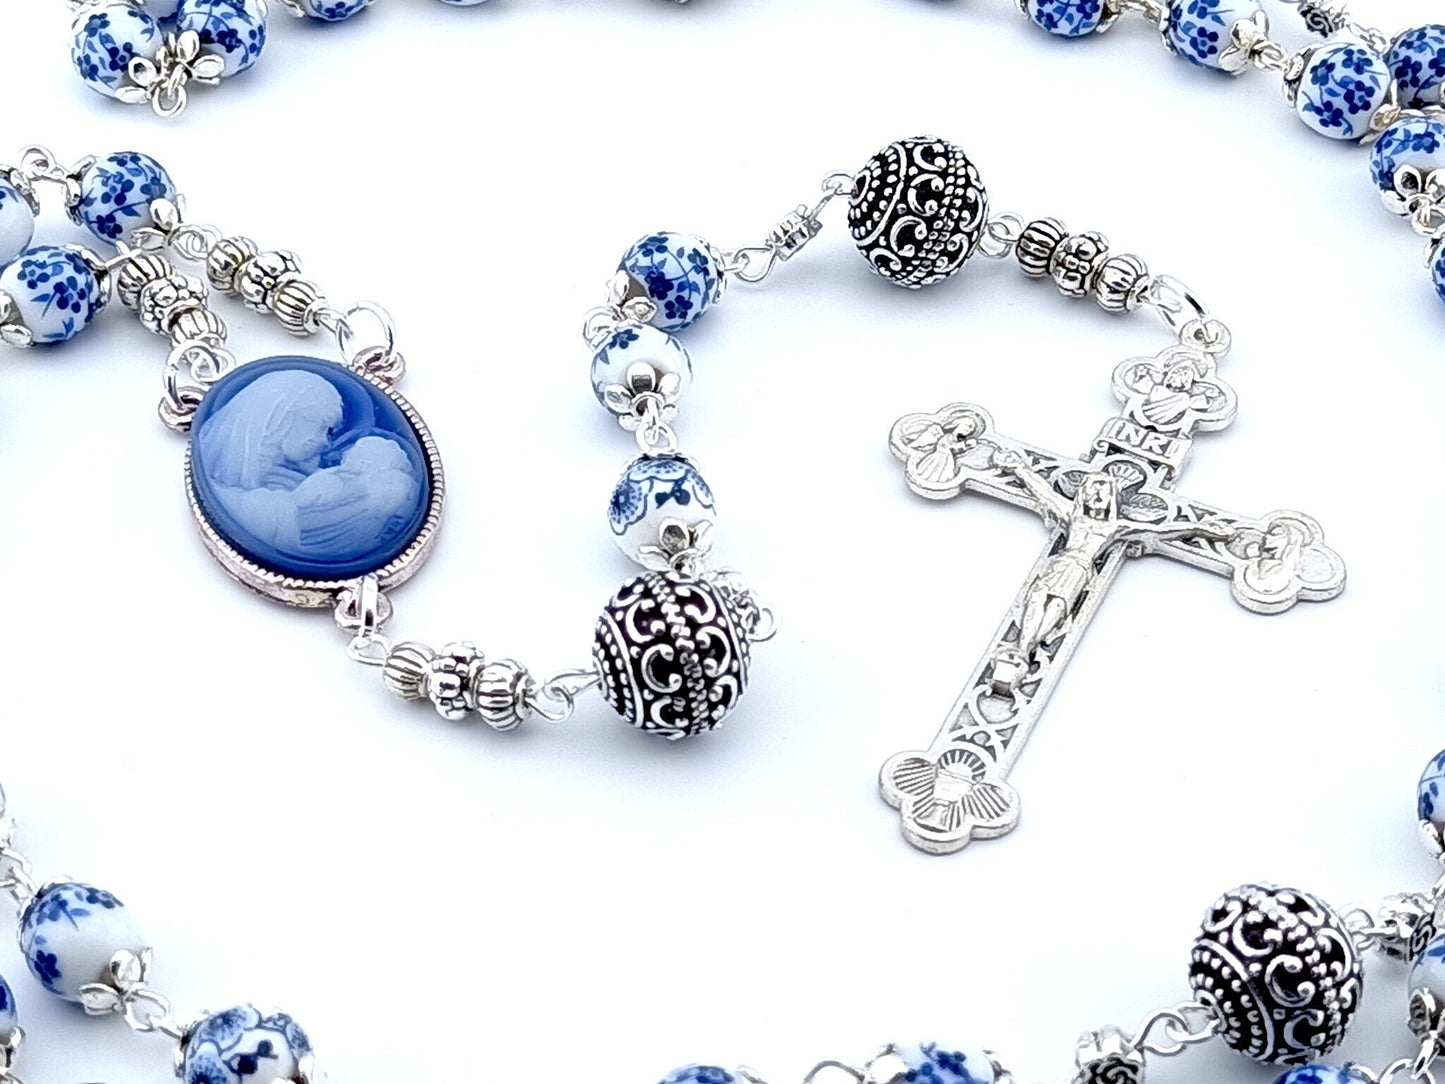 Virgin Mary and Child unique rosary beads with blue floral porcelain beads, silver pater beads, crucifix and cameo centre medal.